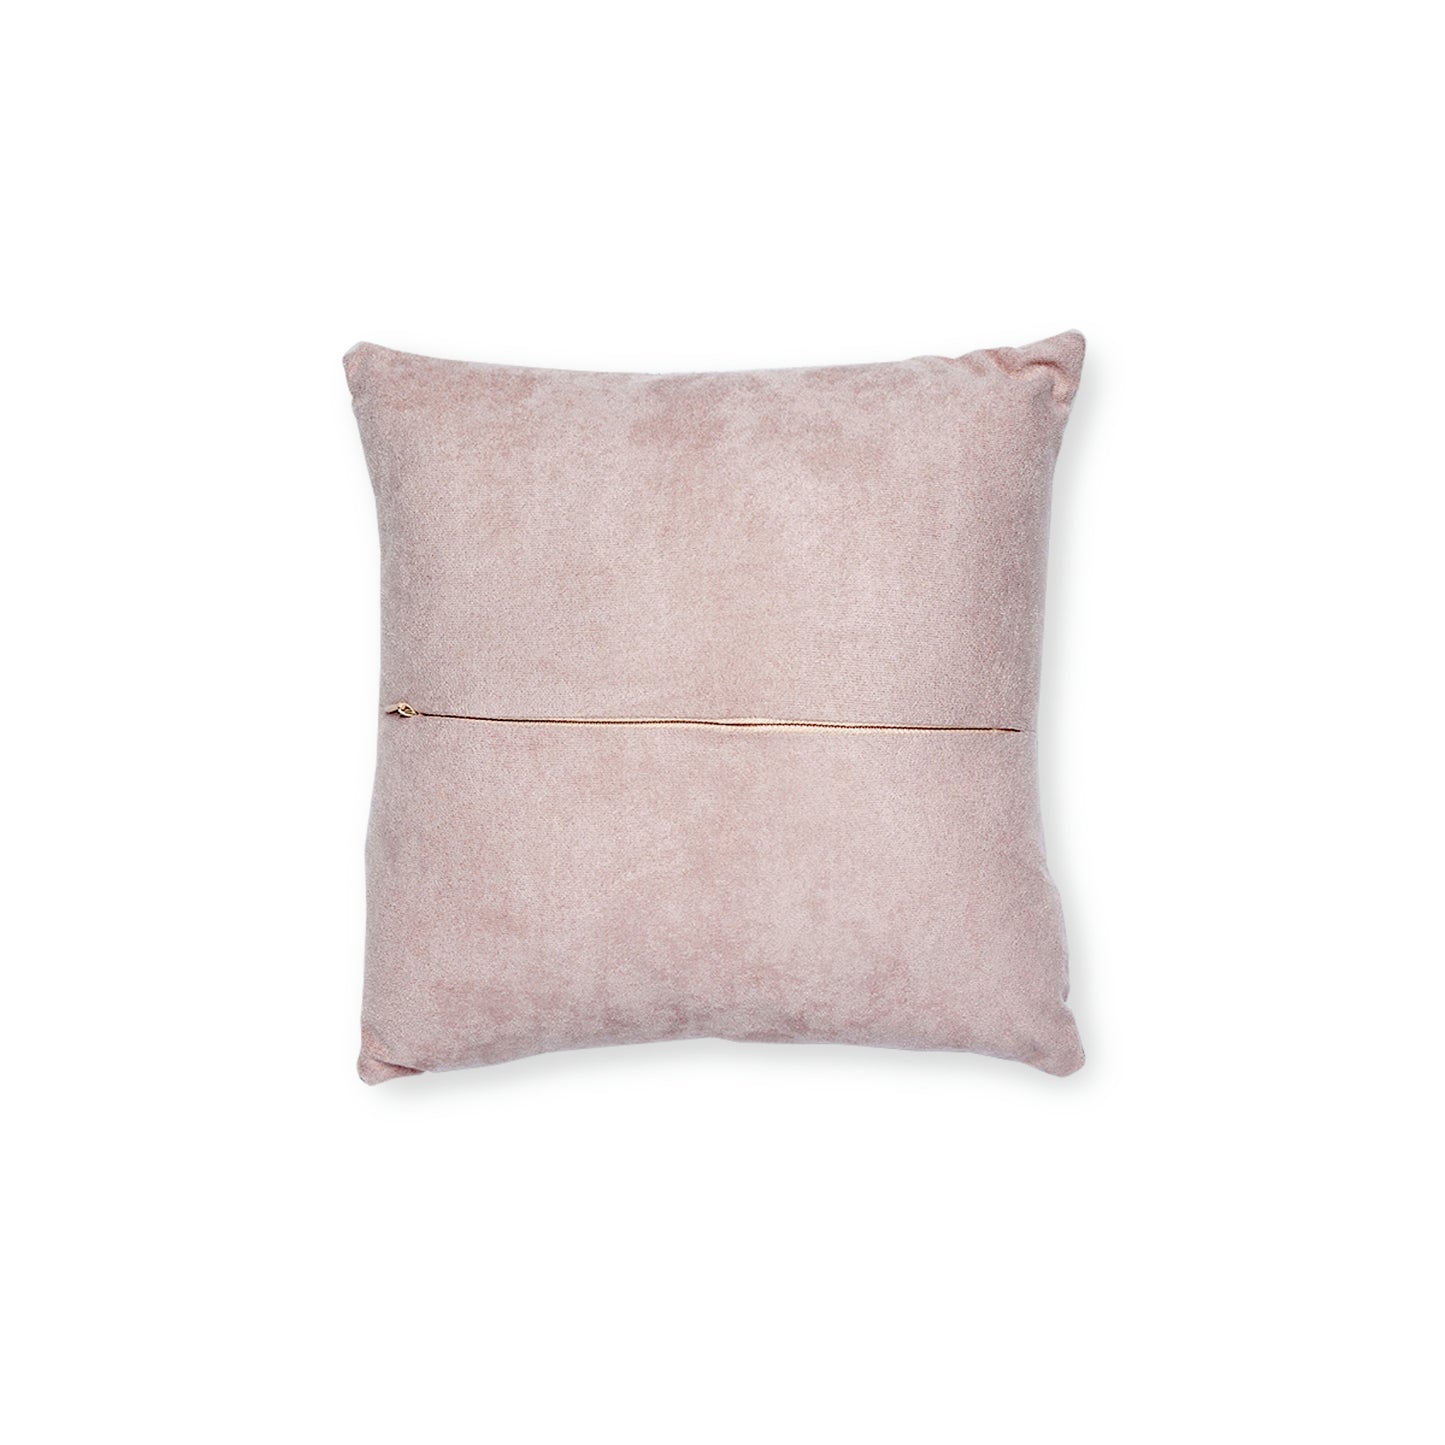 Bride to be  Pillow - Pink Back